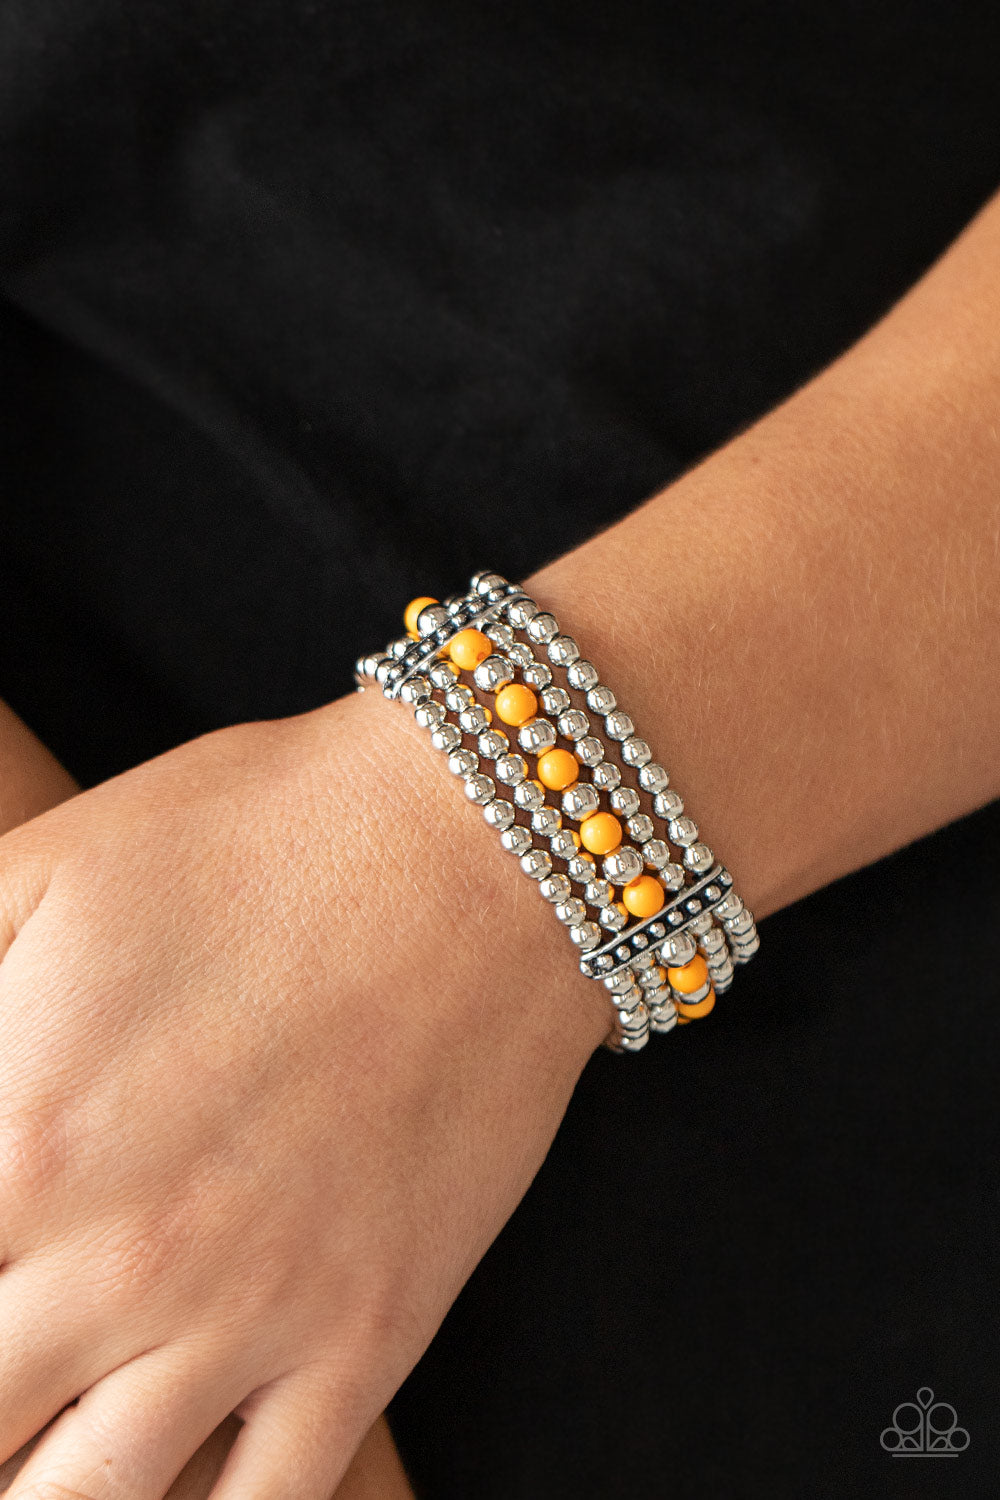 Paparazzi Gloss Over The Details - Orange Bracelet - A Finishing Touch Jewelry